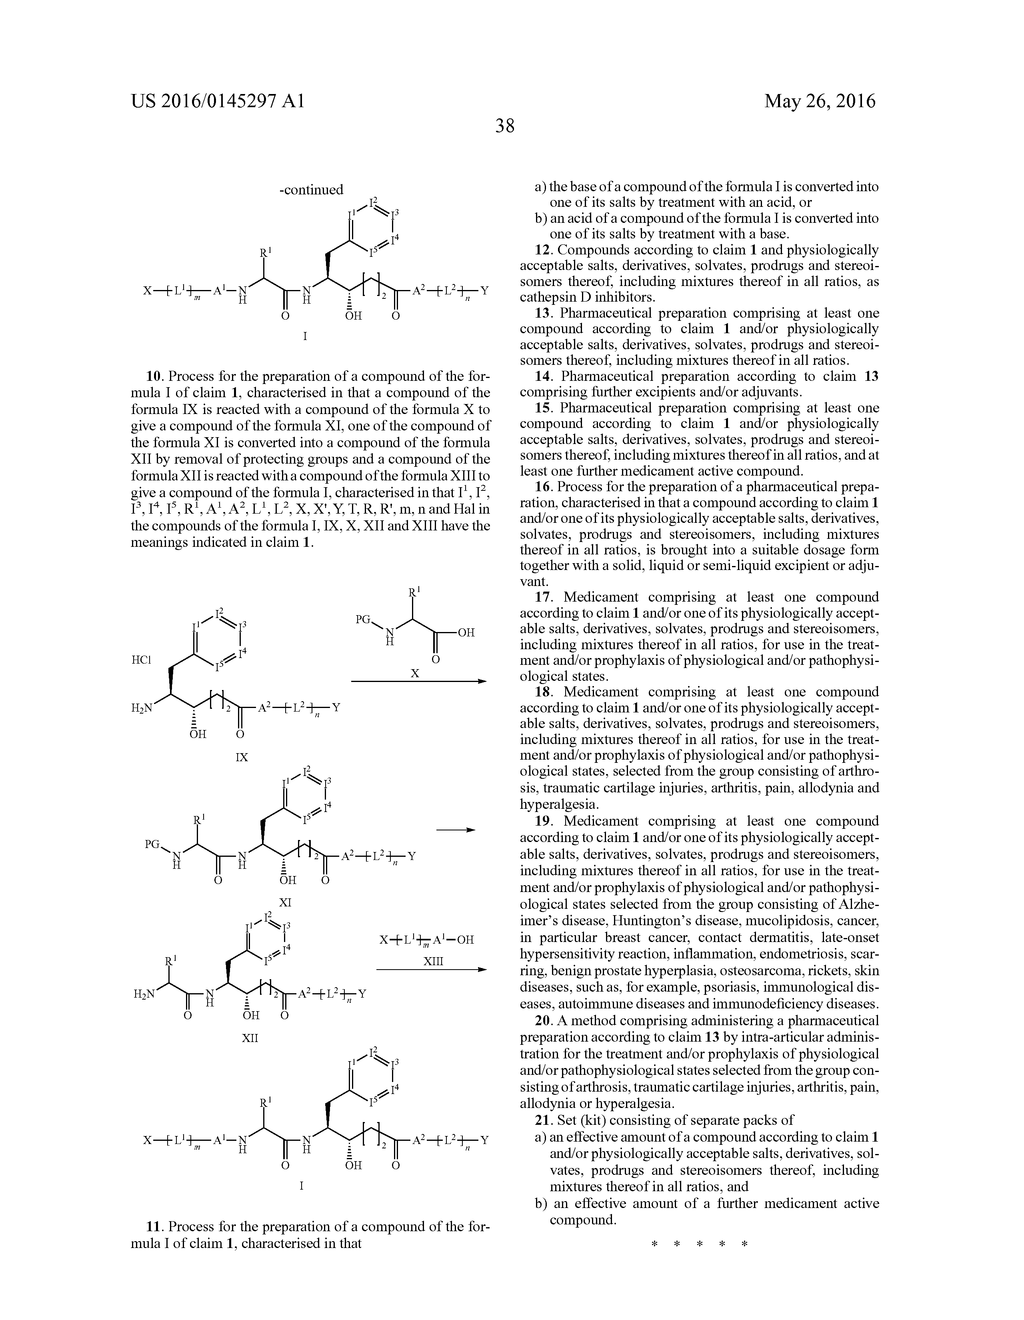 HYDROXY-ETHYLENE DERIVATIVES FOR THE TREATMENT OF ARTHROSIS - diagram, schematic, and image 39